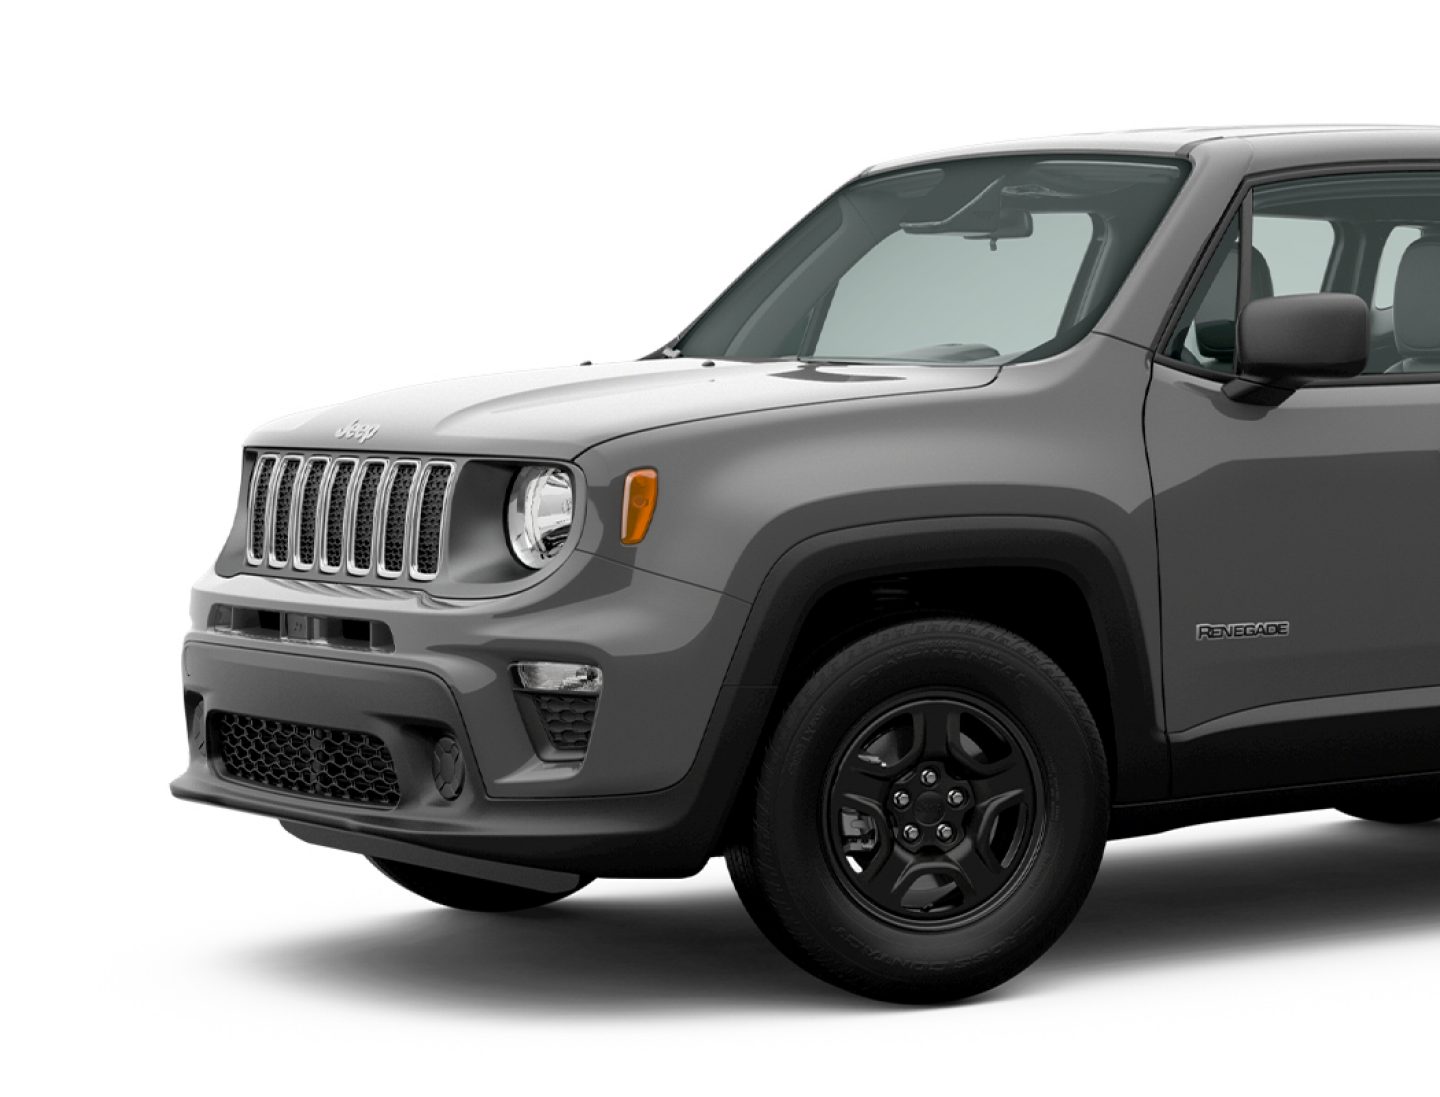 The 16-inch steel wheel on the 2020 Jeep Renegade, the first of eight available wheels.